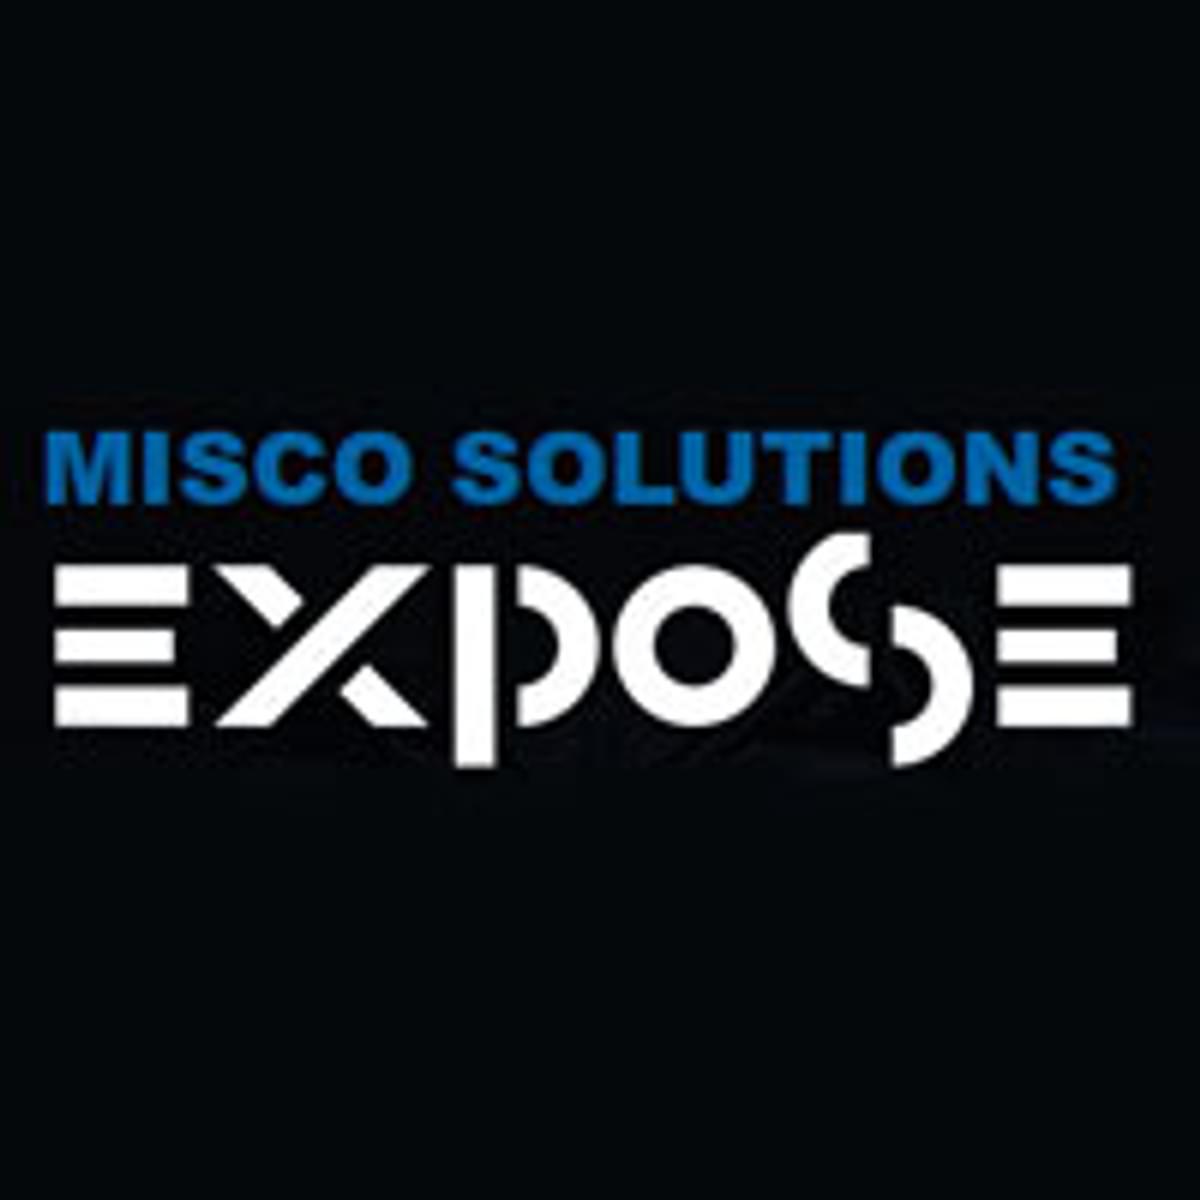 Misco Solutions Expose 2017 in Bodegraven image